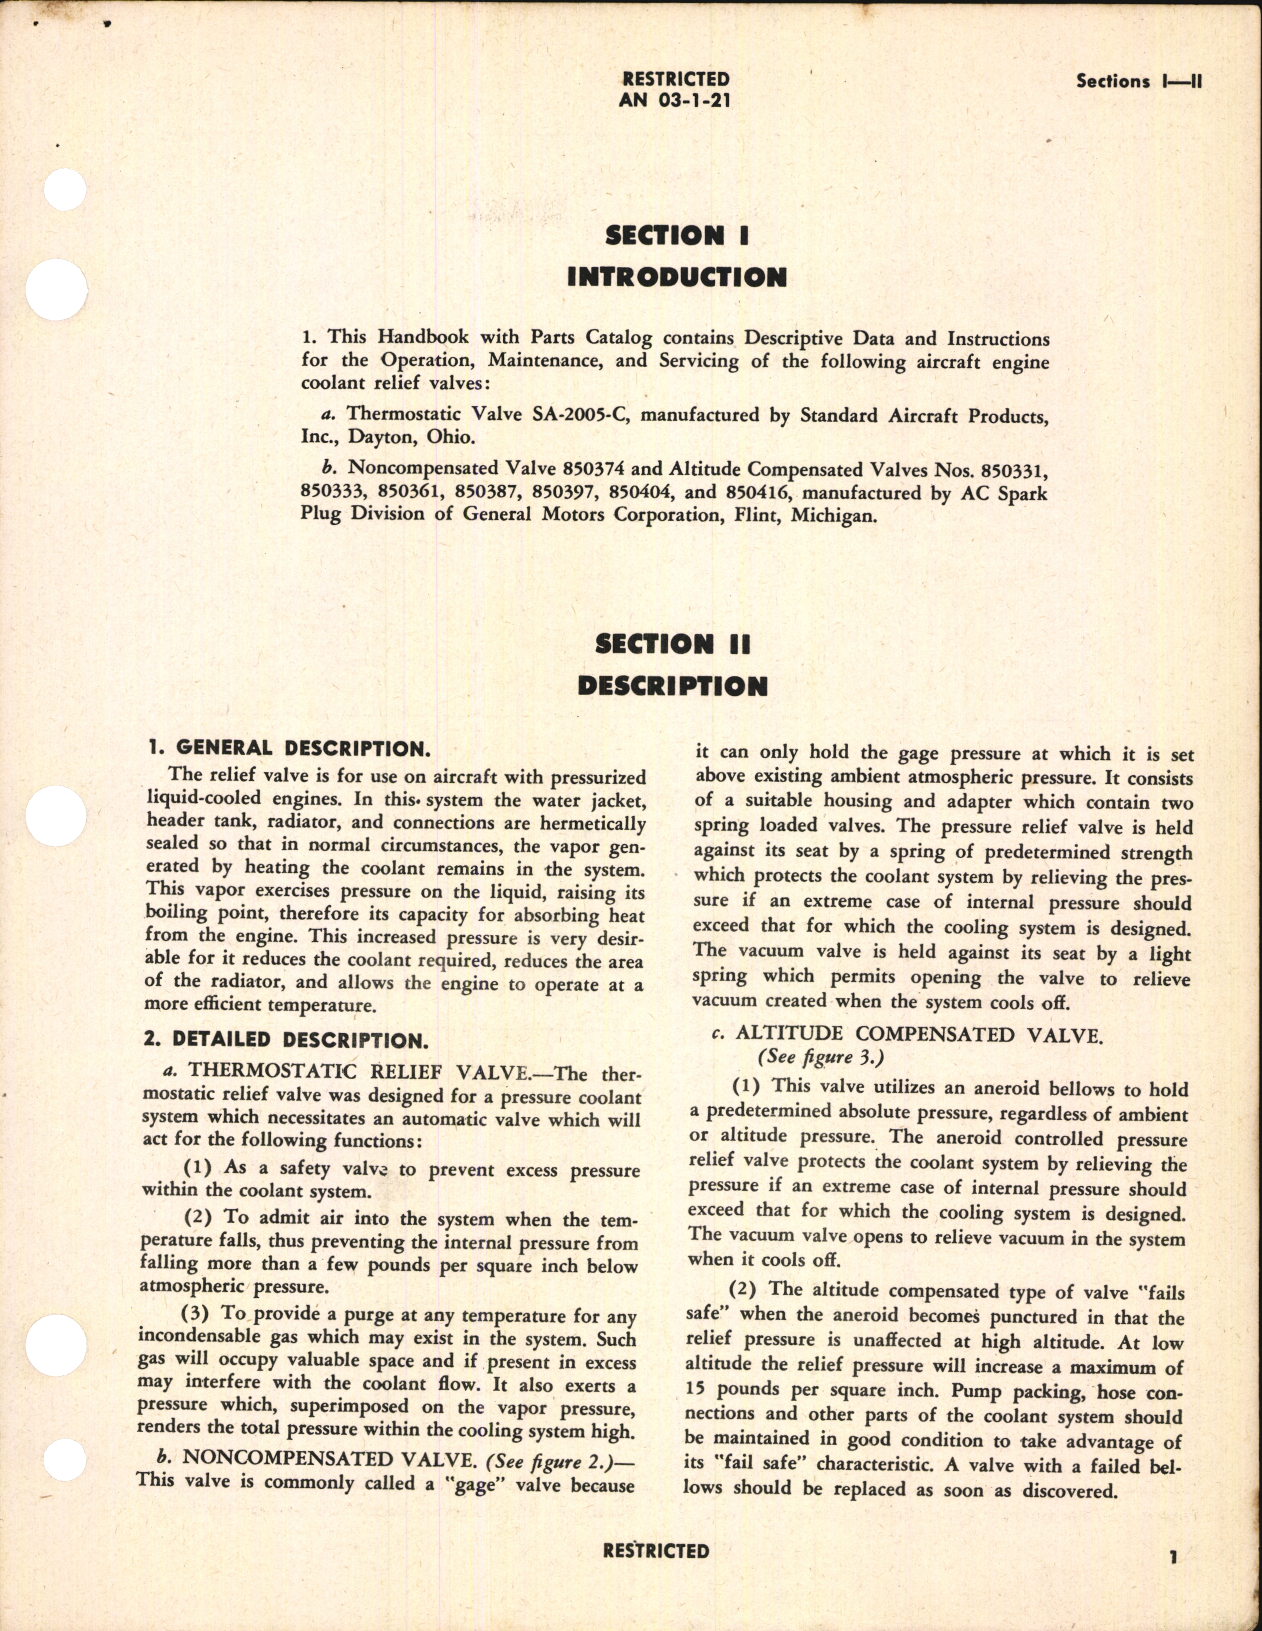 Sample page 5 from AirCorps Library document: Operation, Service and Overhaul Instructions with Parts Catalog for Coolant Relief Valves